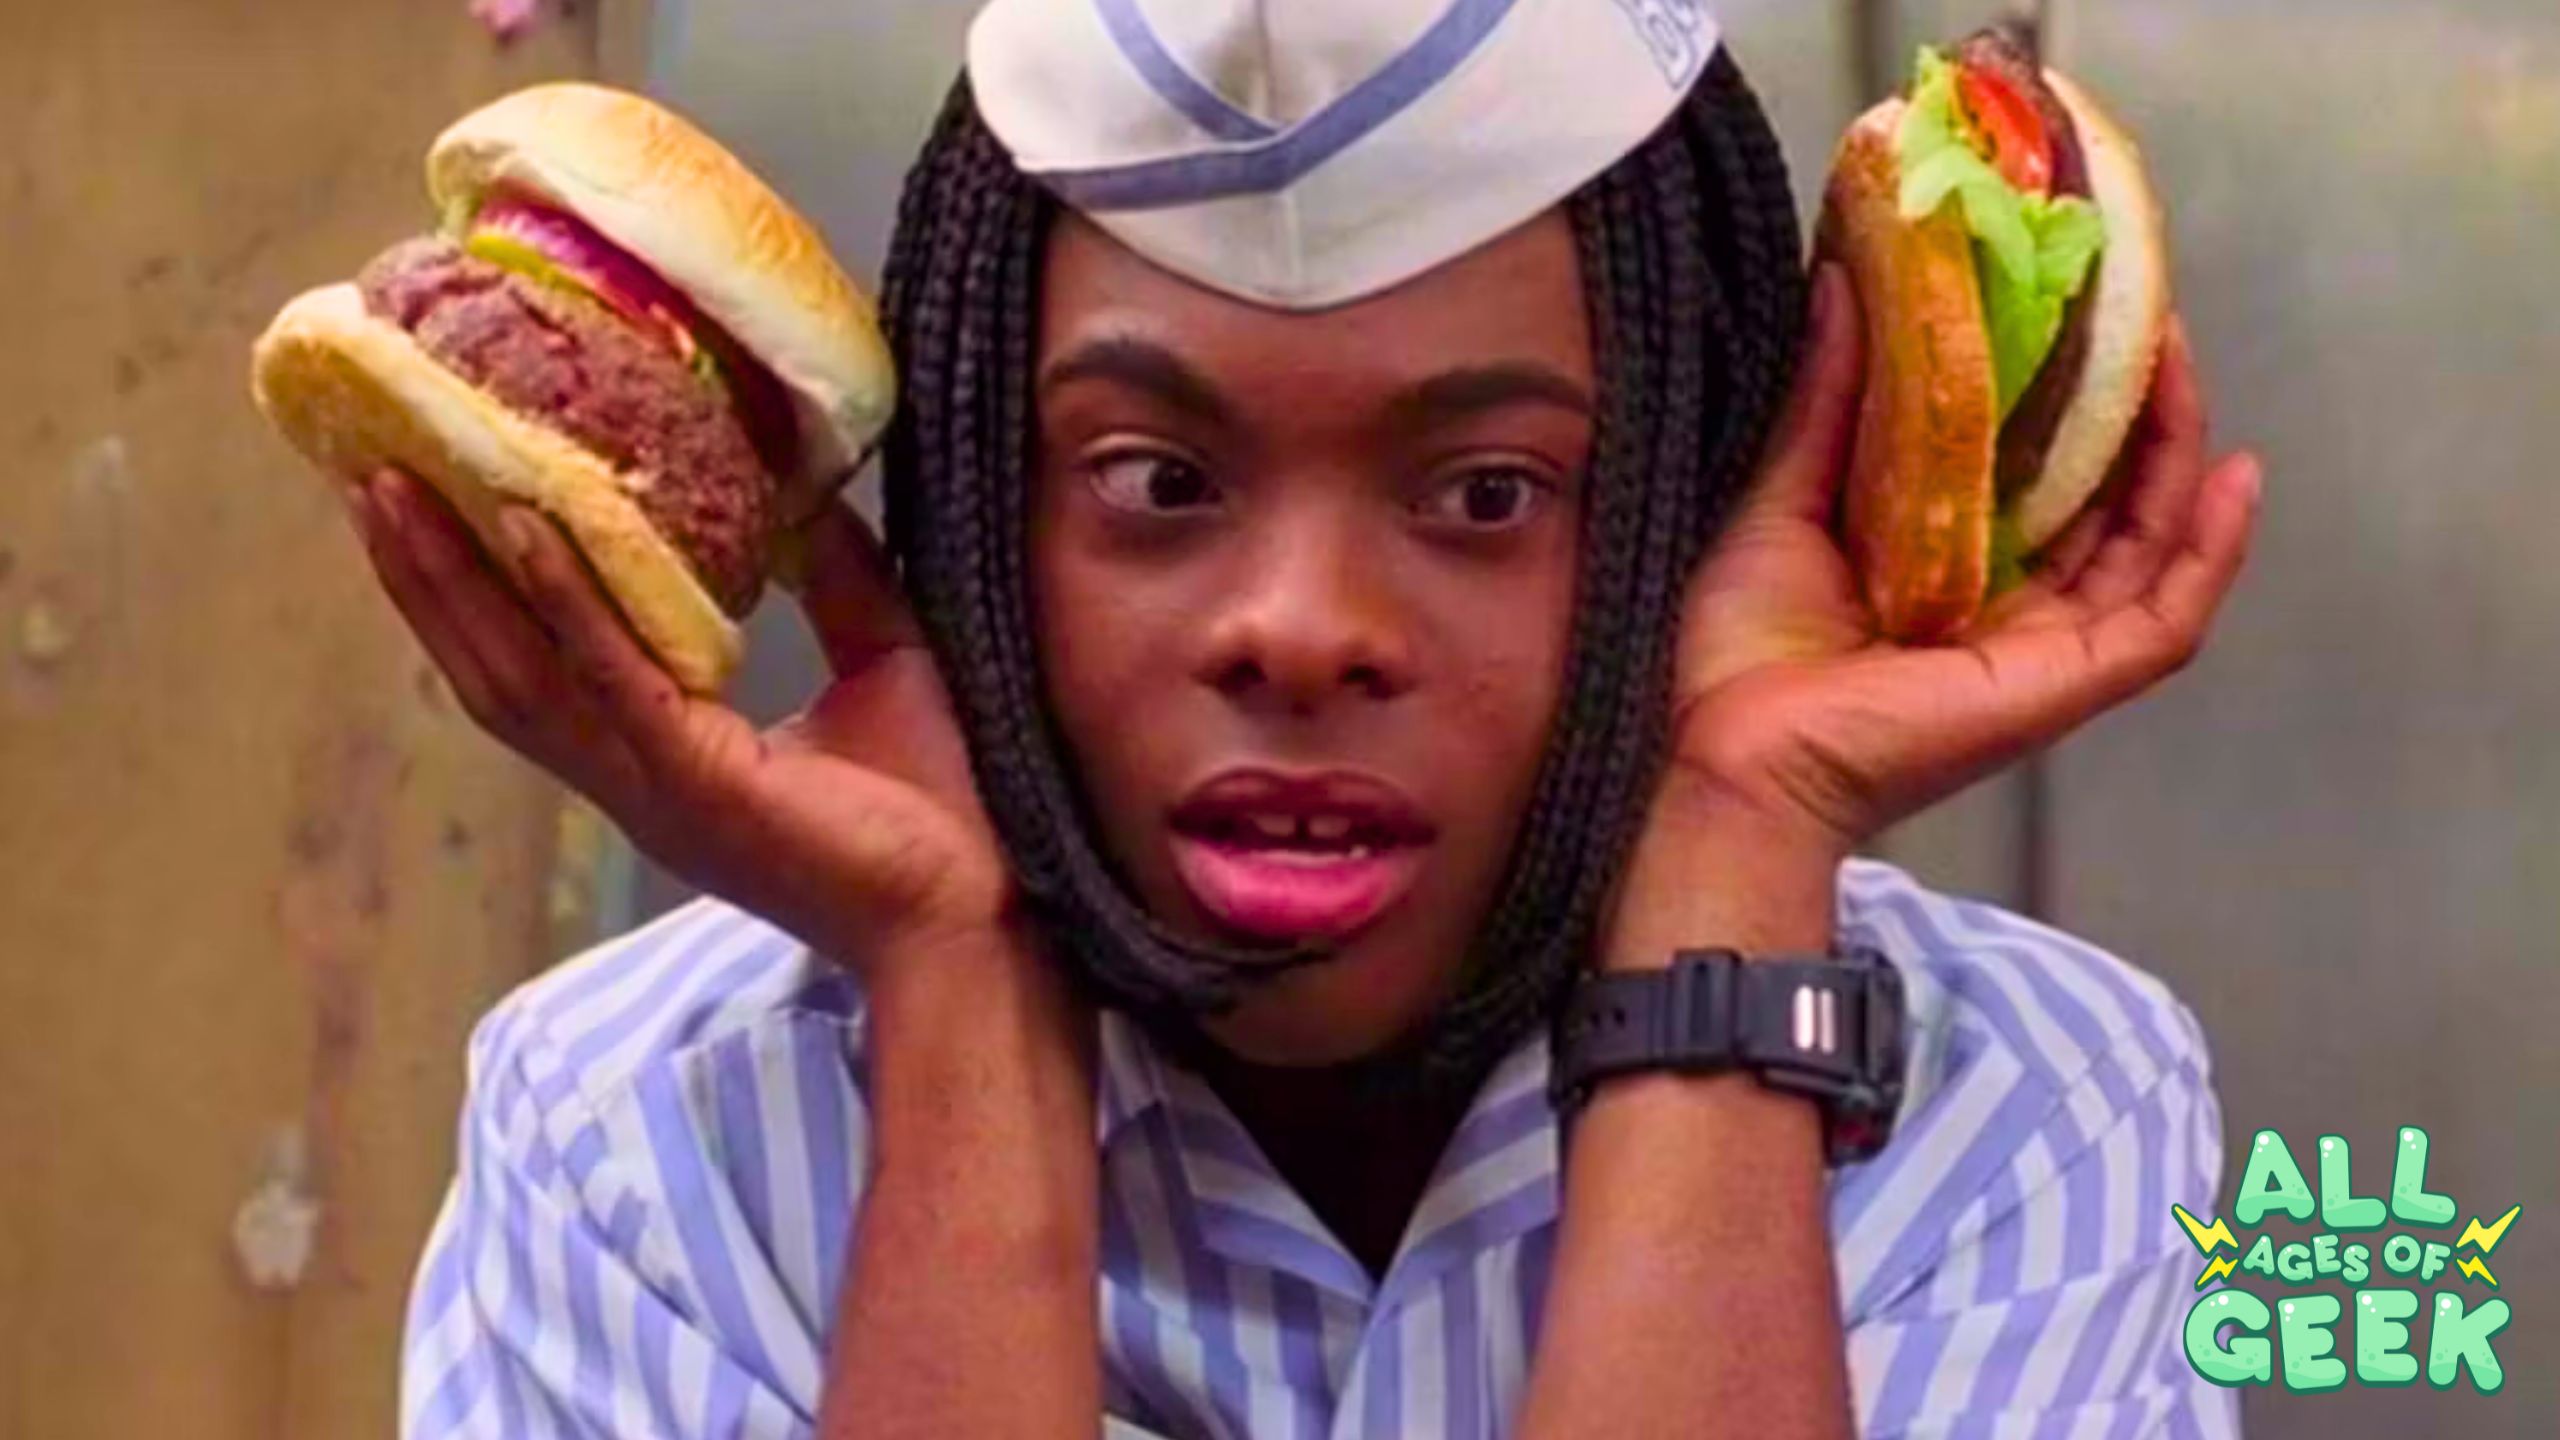 Good Burger 2 All Ages of Geek